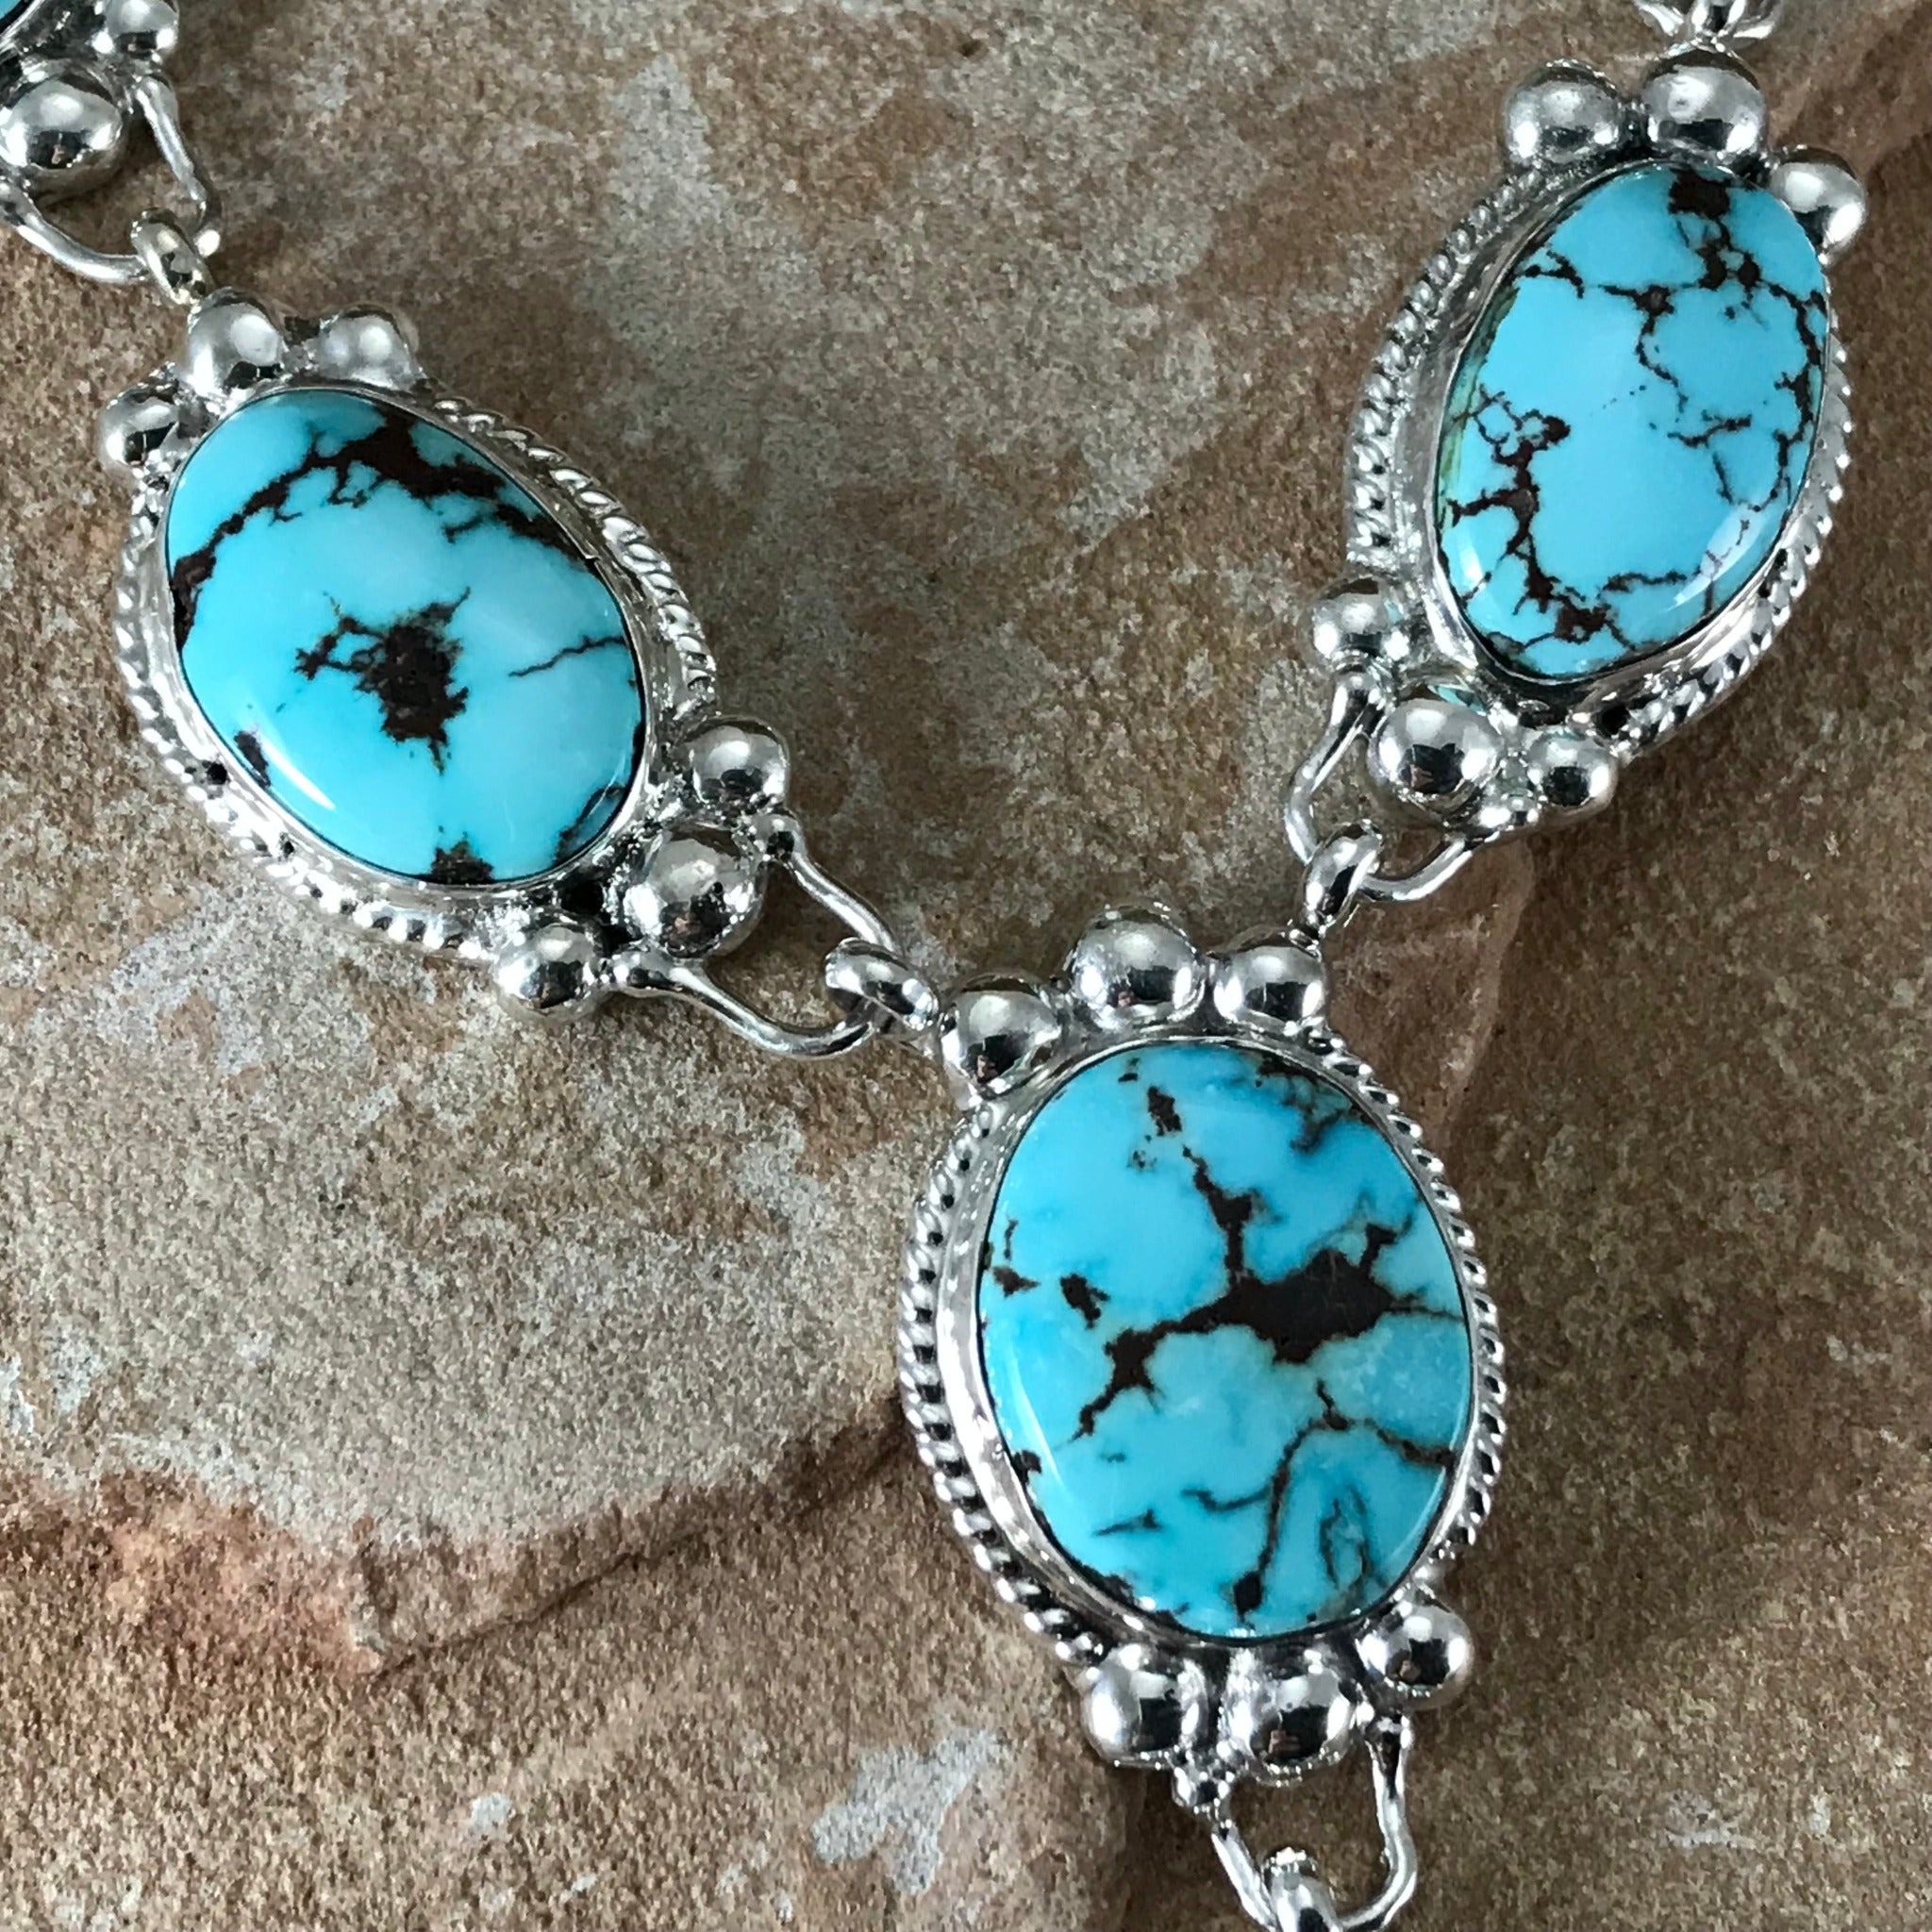 Shiner Fashion Turquoise Lariat Necklace & Earrings - Accessorize